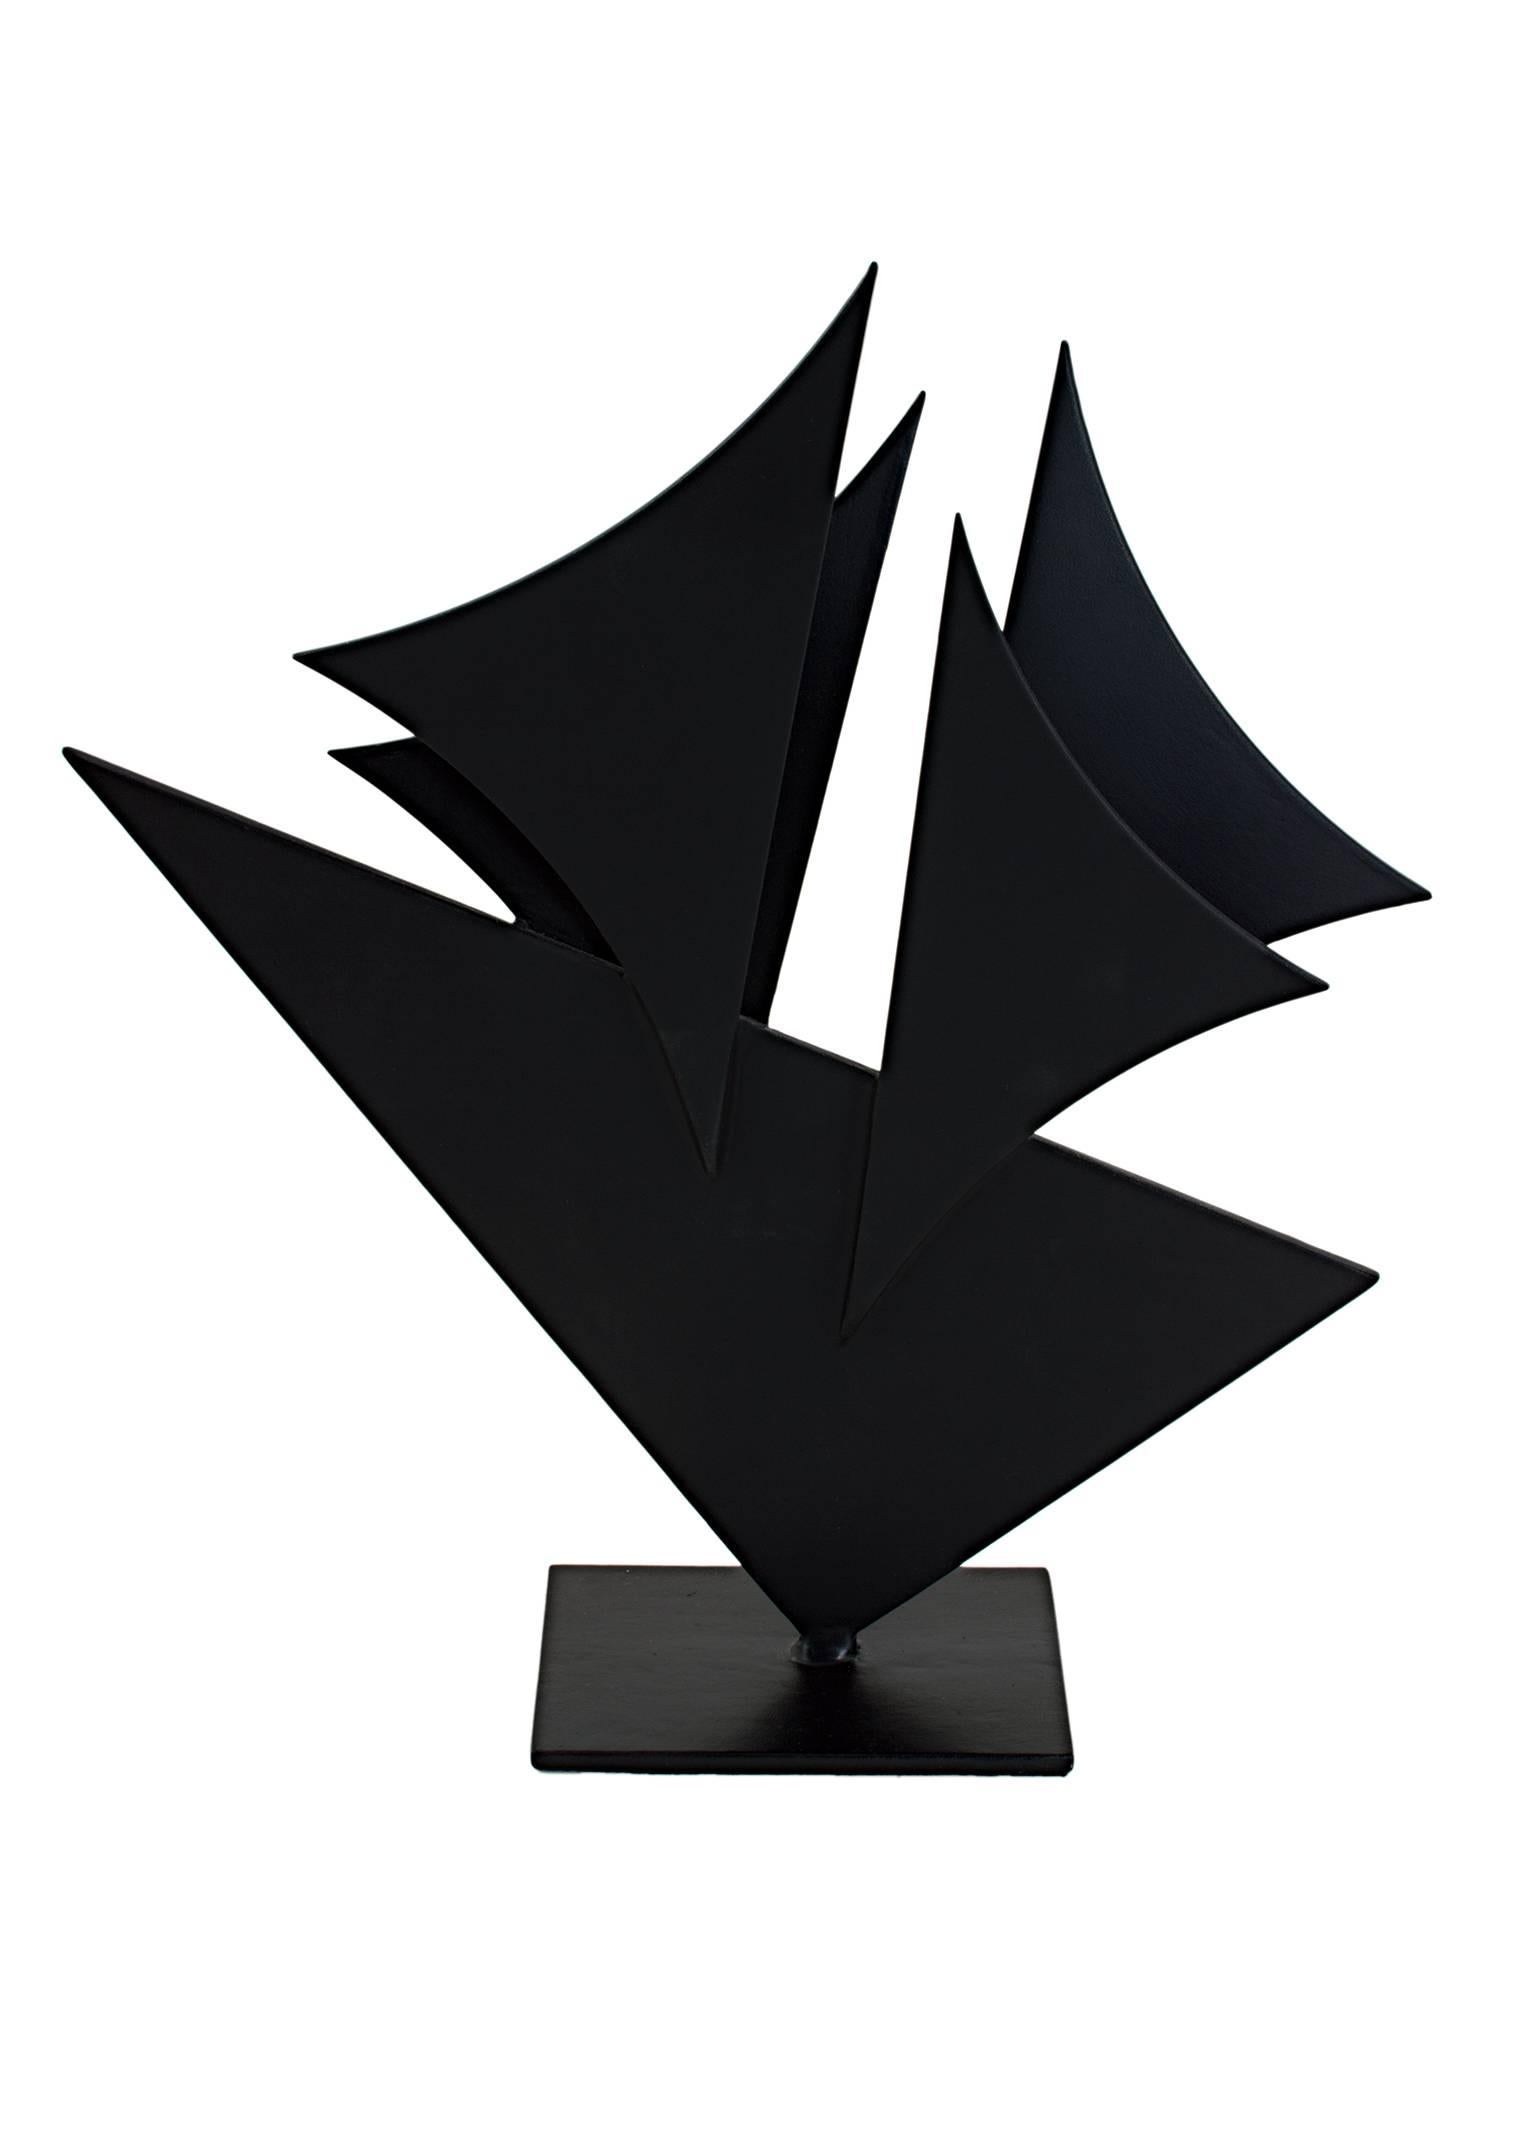 "Midnight Sea Shapes" is a painted steel sculpture by Ralph Wickstrom. It consists of five triangle shapes intersecting. The shapes are reminiscent of sails and are painted in a dark gray, nearly black, color. 

16 1/4" x 14 1/4" sculpture

Ralph